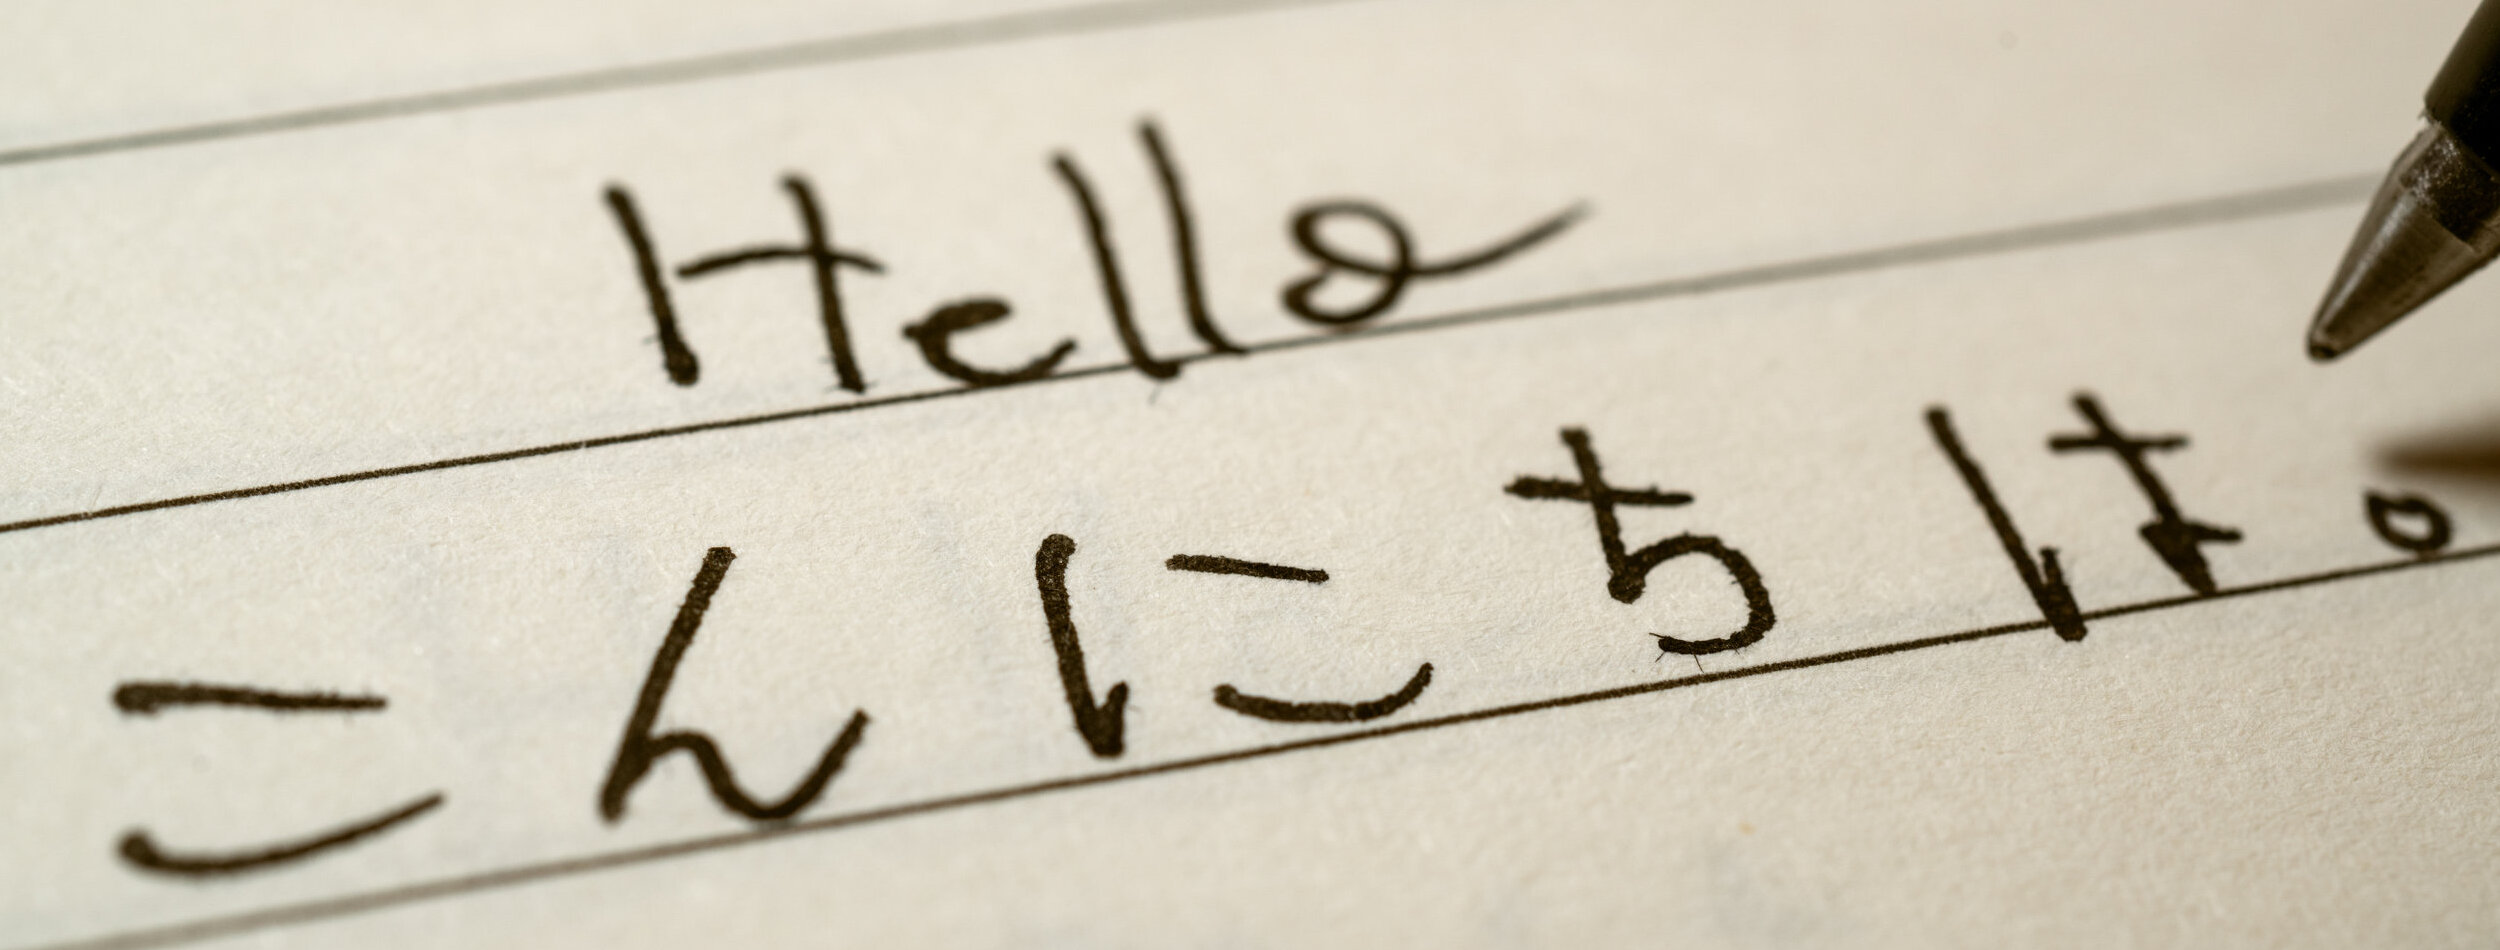 Beginner Japanese language learner writing Hello word in Japanese hiragana characters on a notebook close-up shot